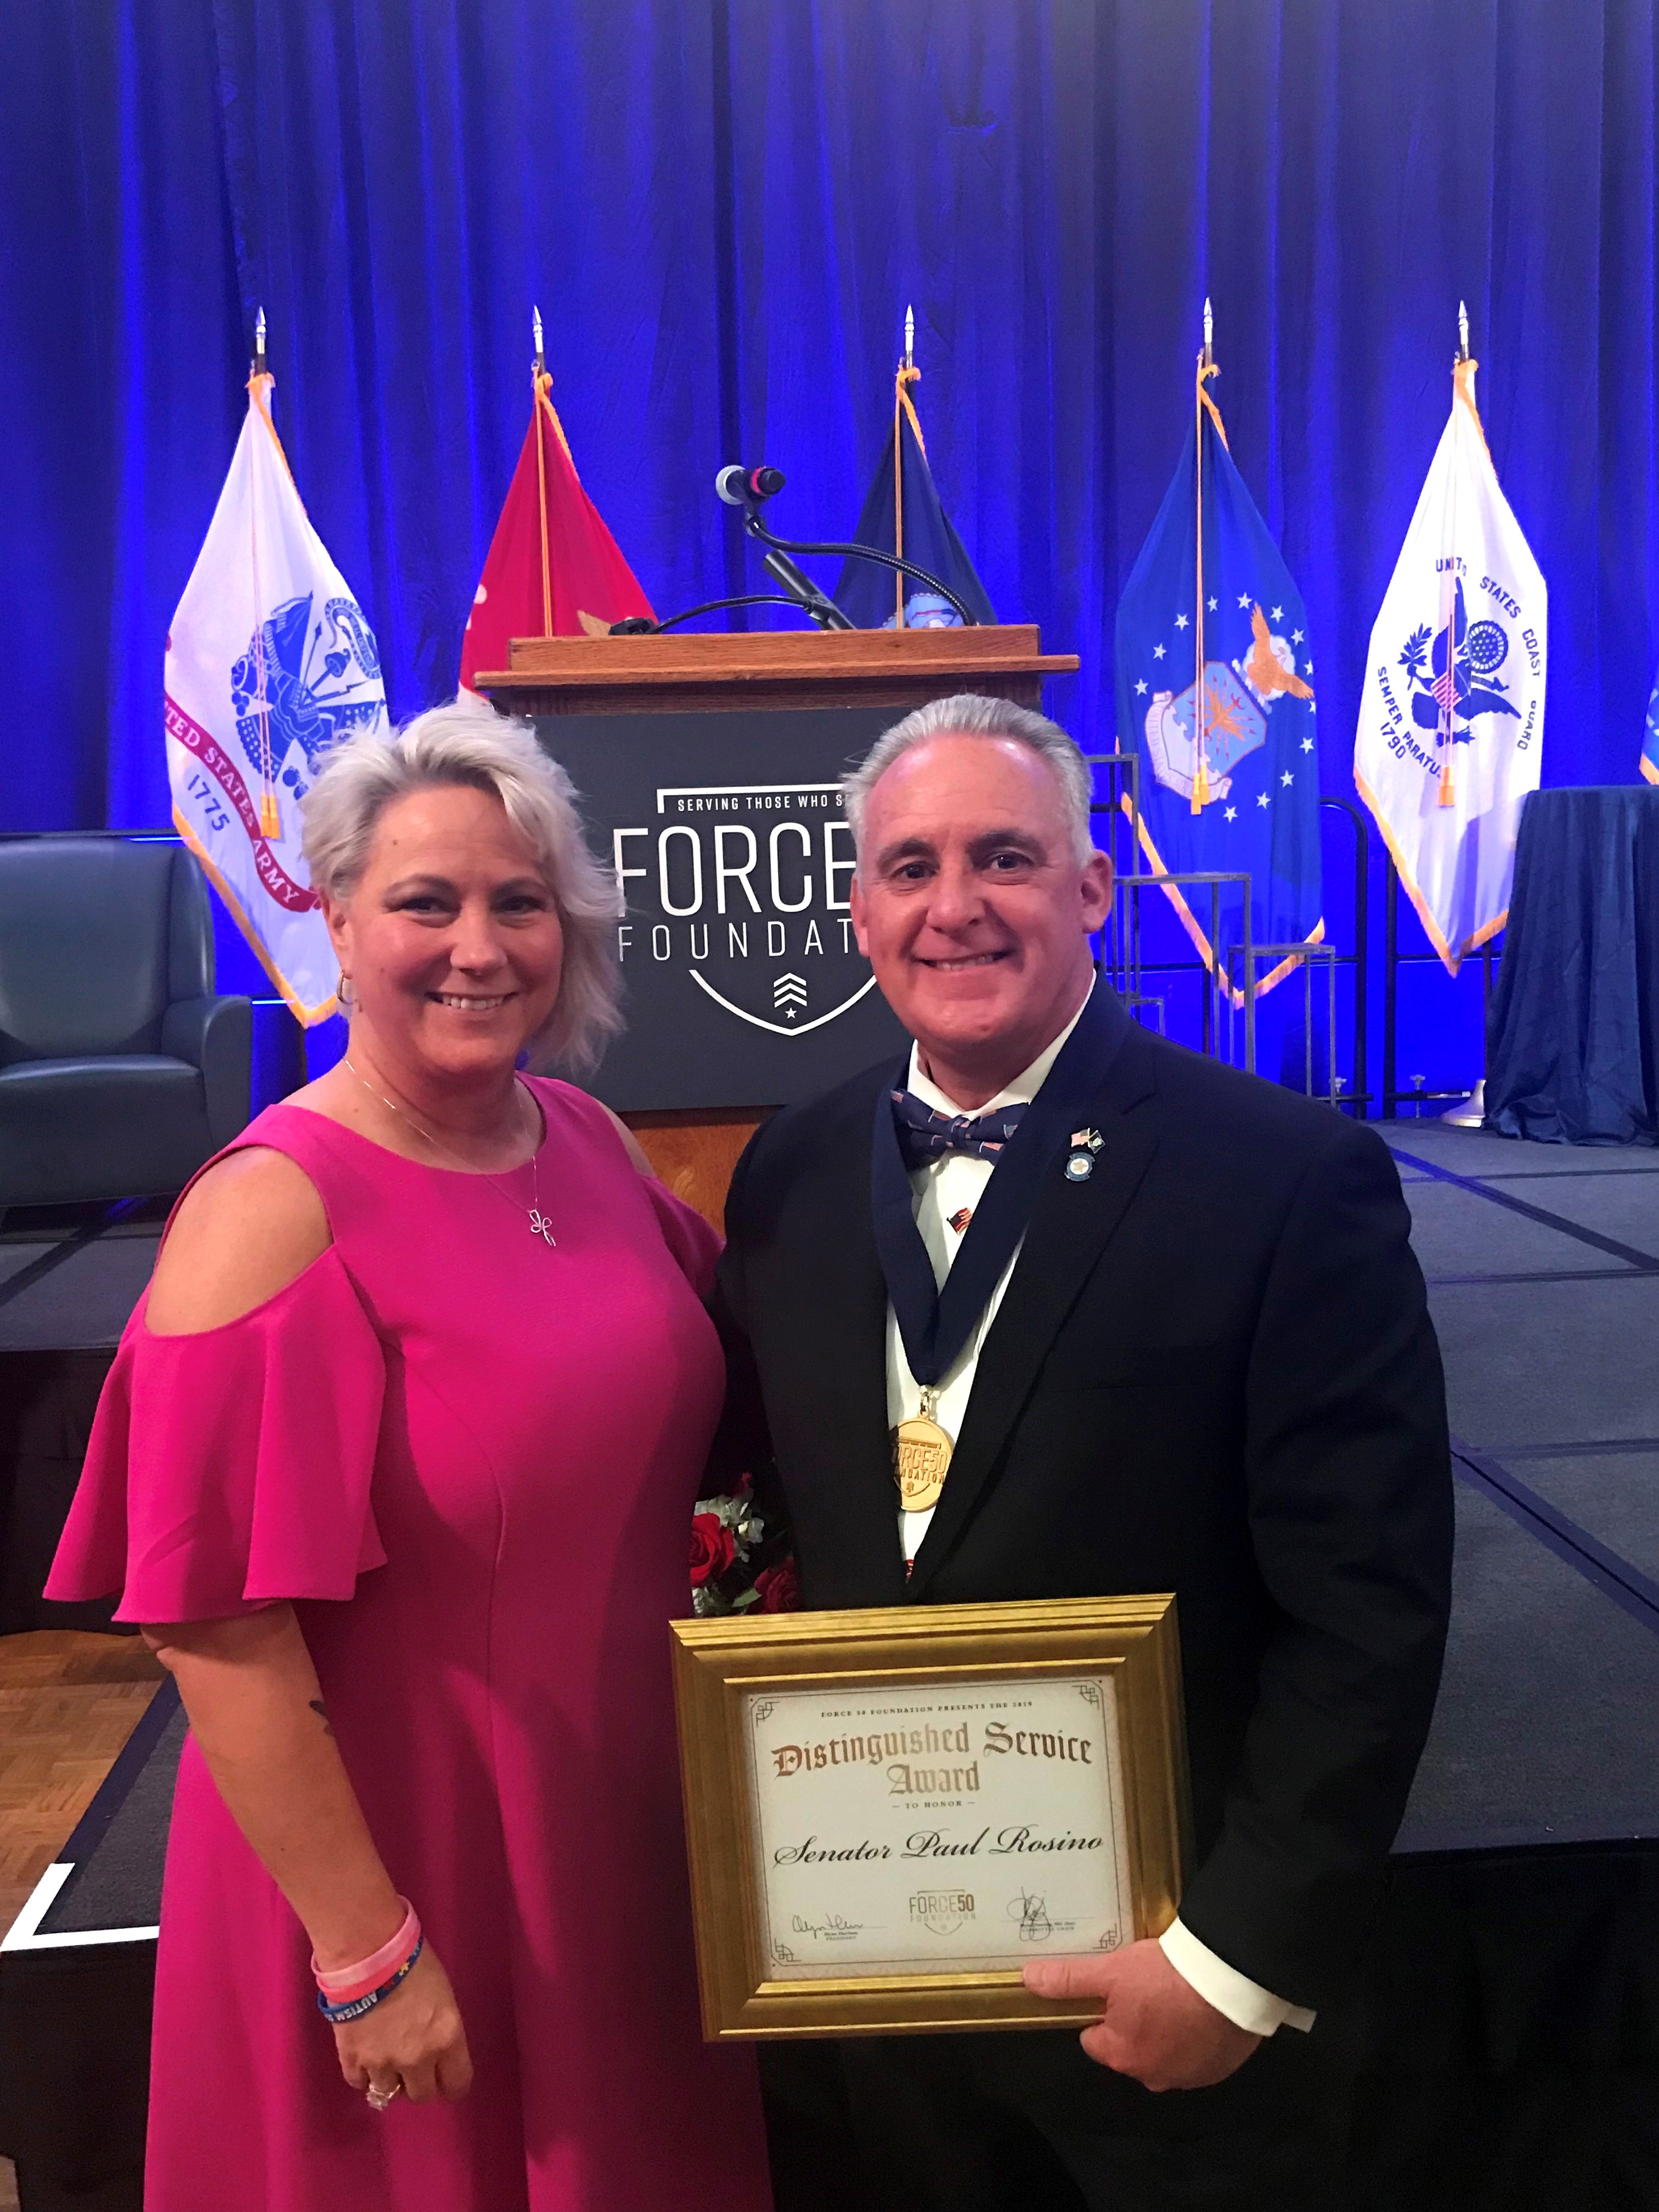 Sen. Paul Rosino and his wife, Kathy, attended the Force 50 Foundation’s Veteran’s Service Awards Banquet on Thursday, May 9, where he received the Distinguished Service Award